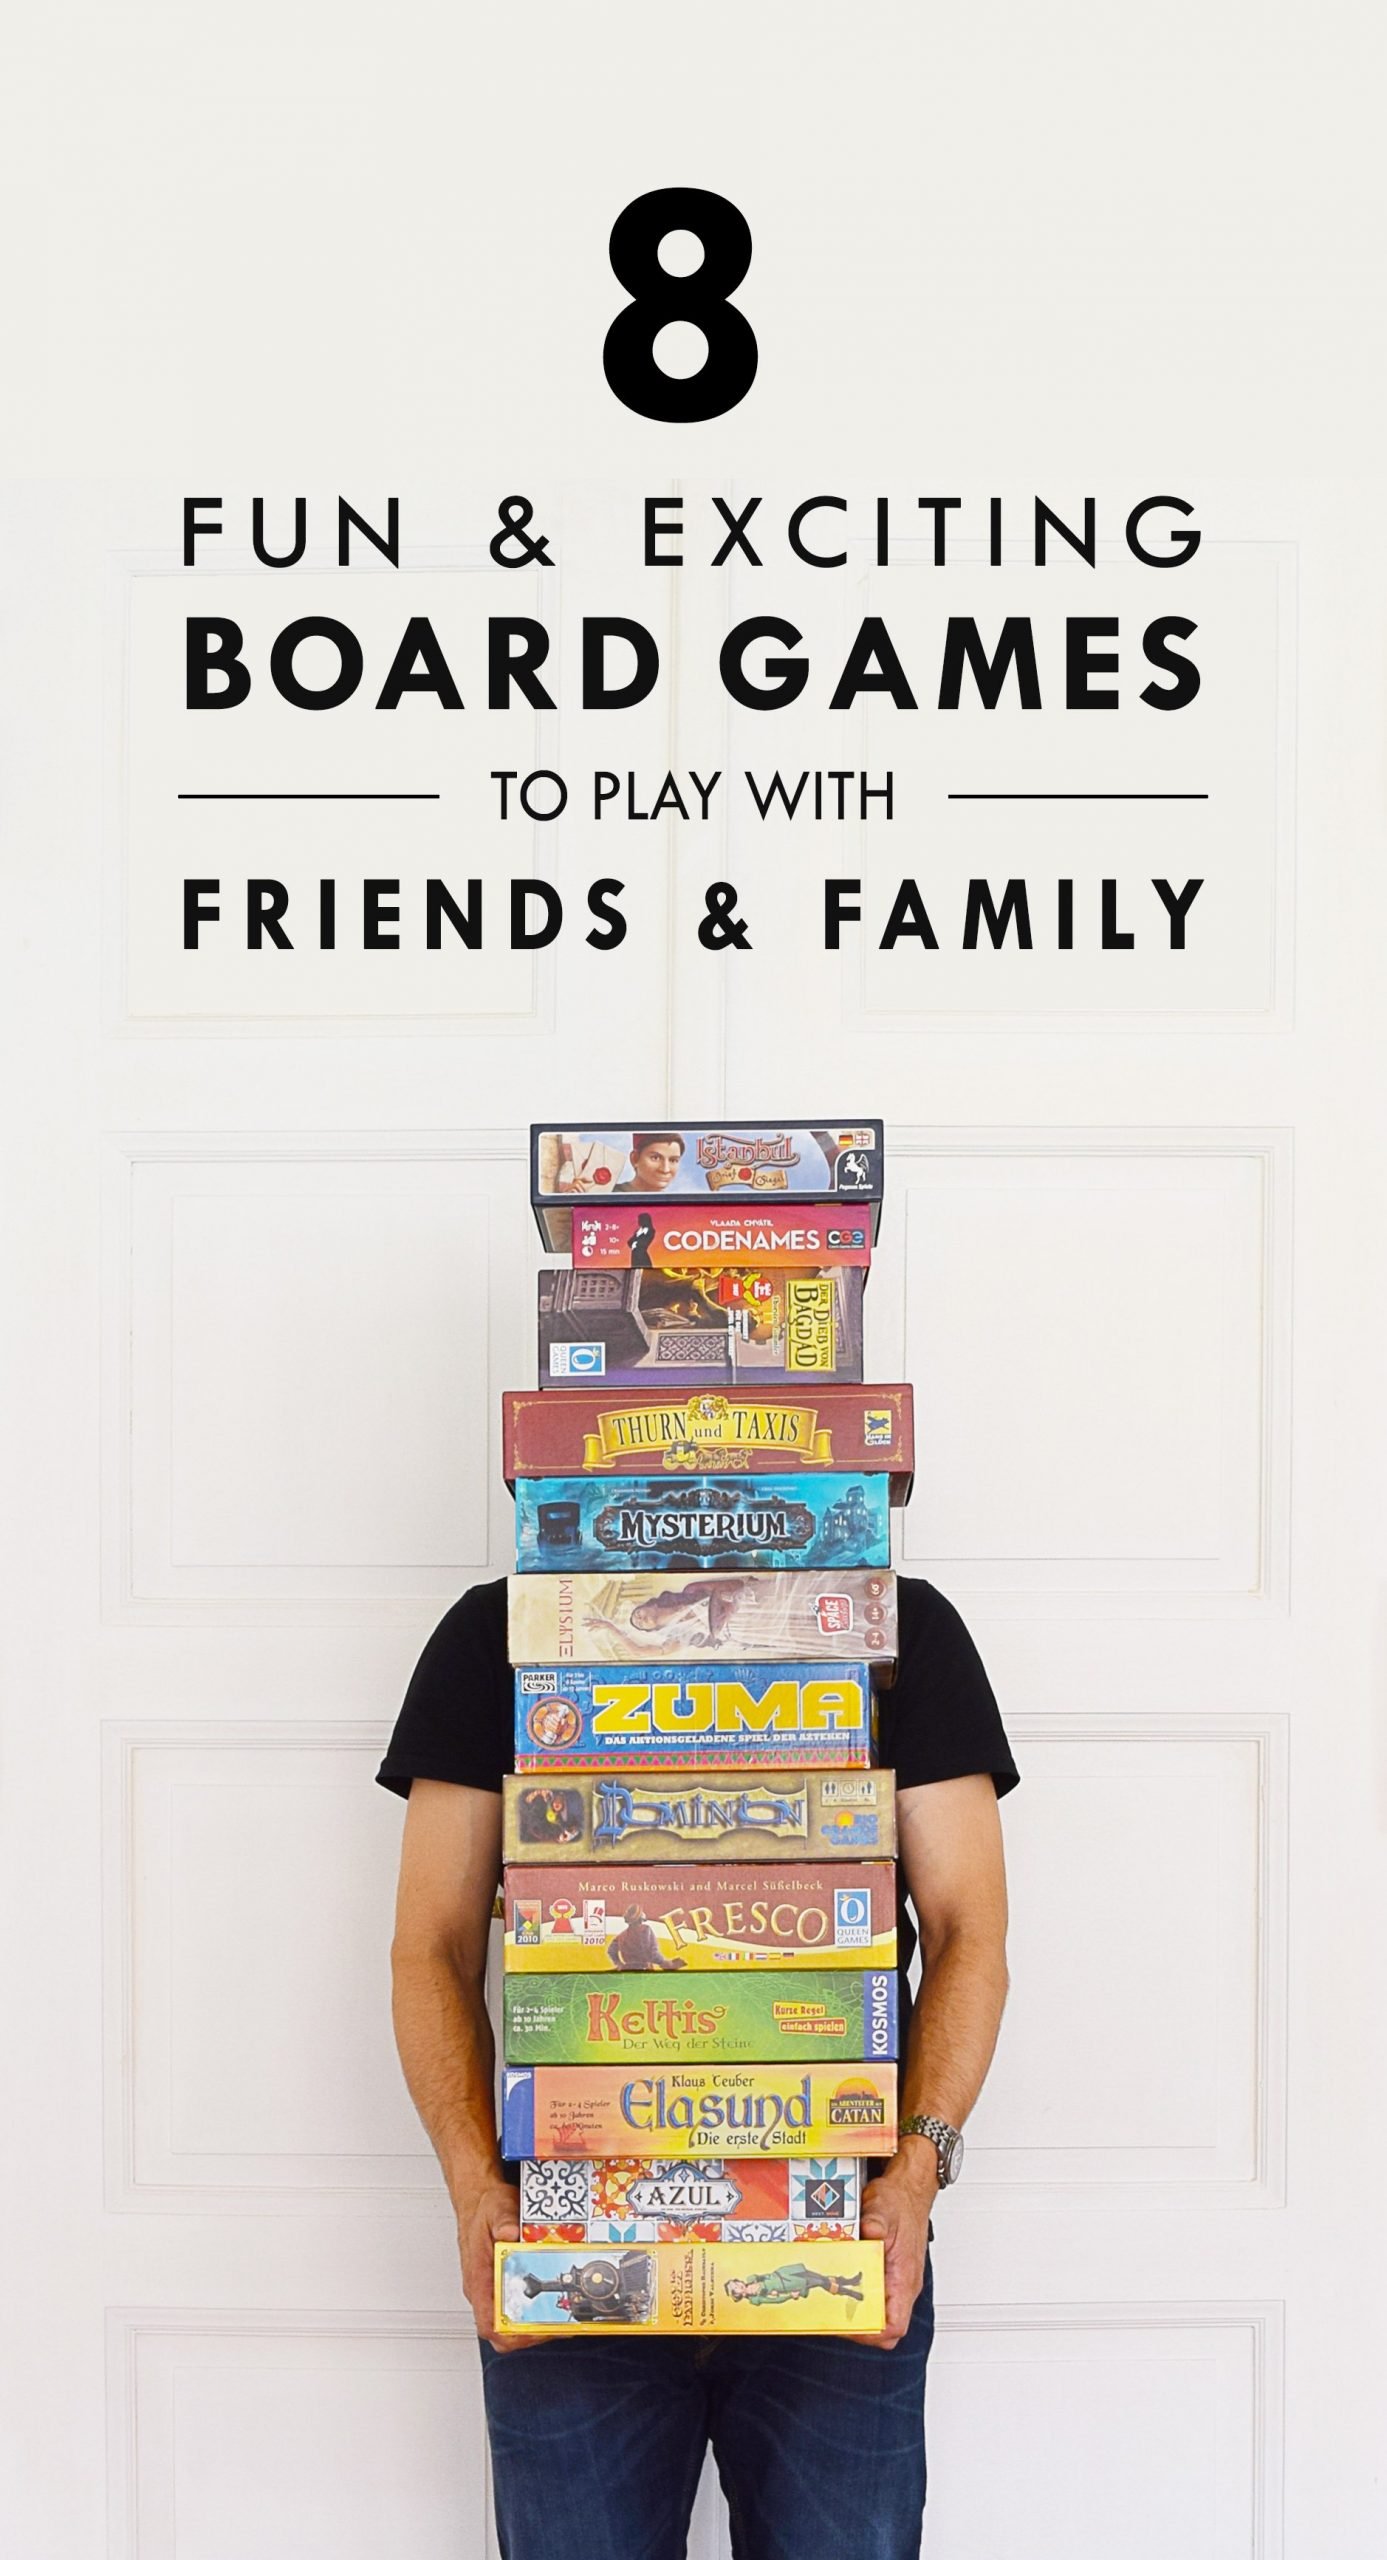 No Thanks Board Game 3-7 Player Funny Board Game For Family/Party/Friend LR 